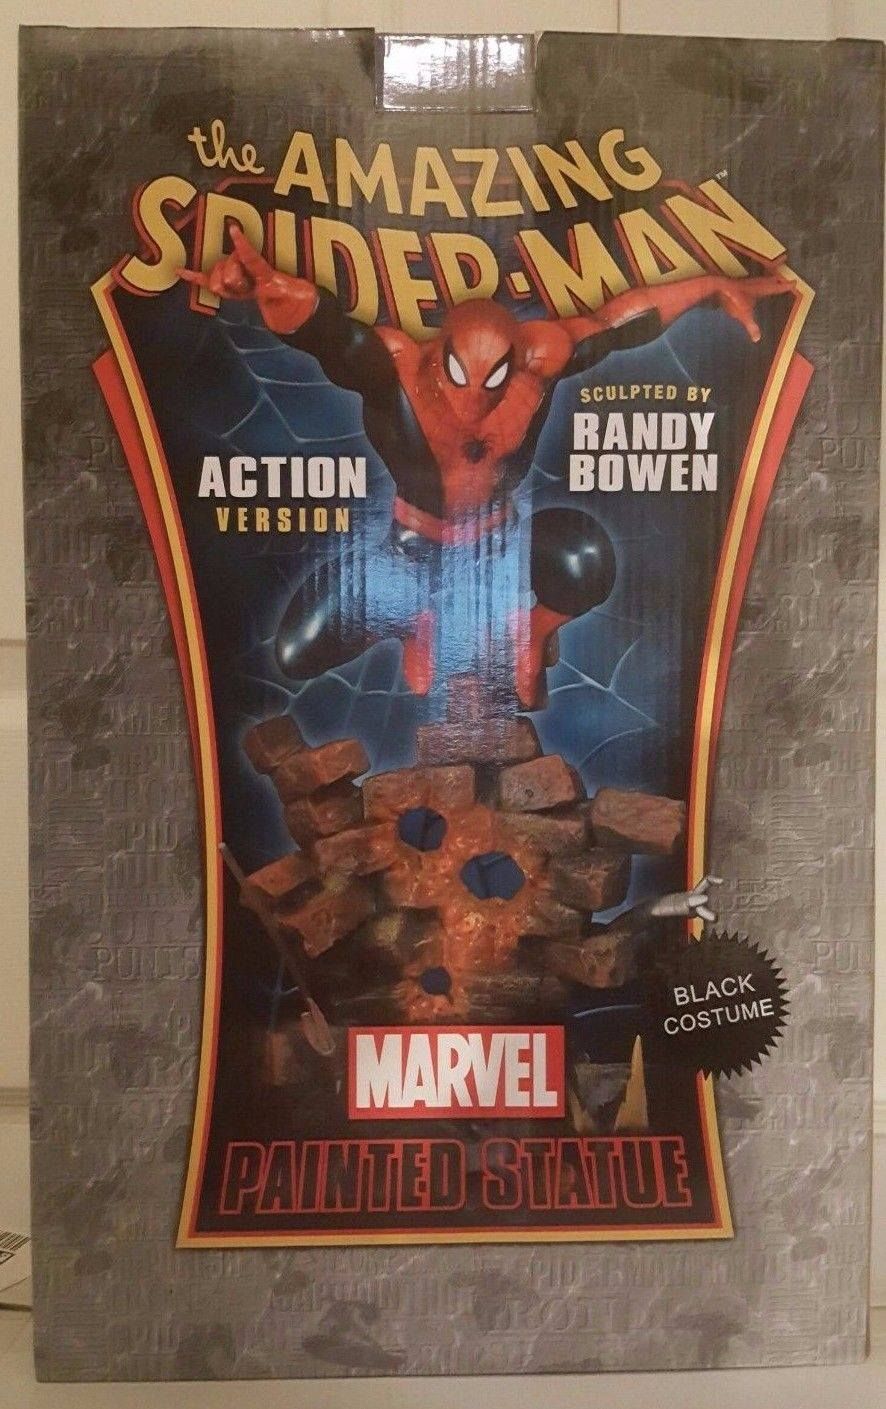 Marvel statues figures & more